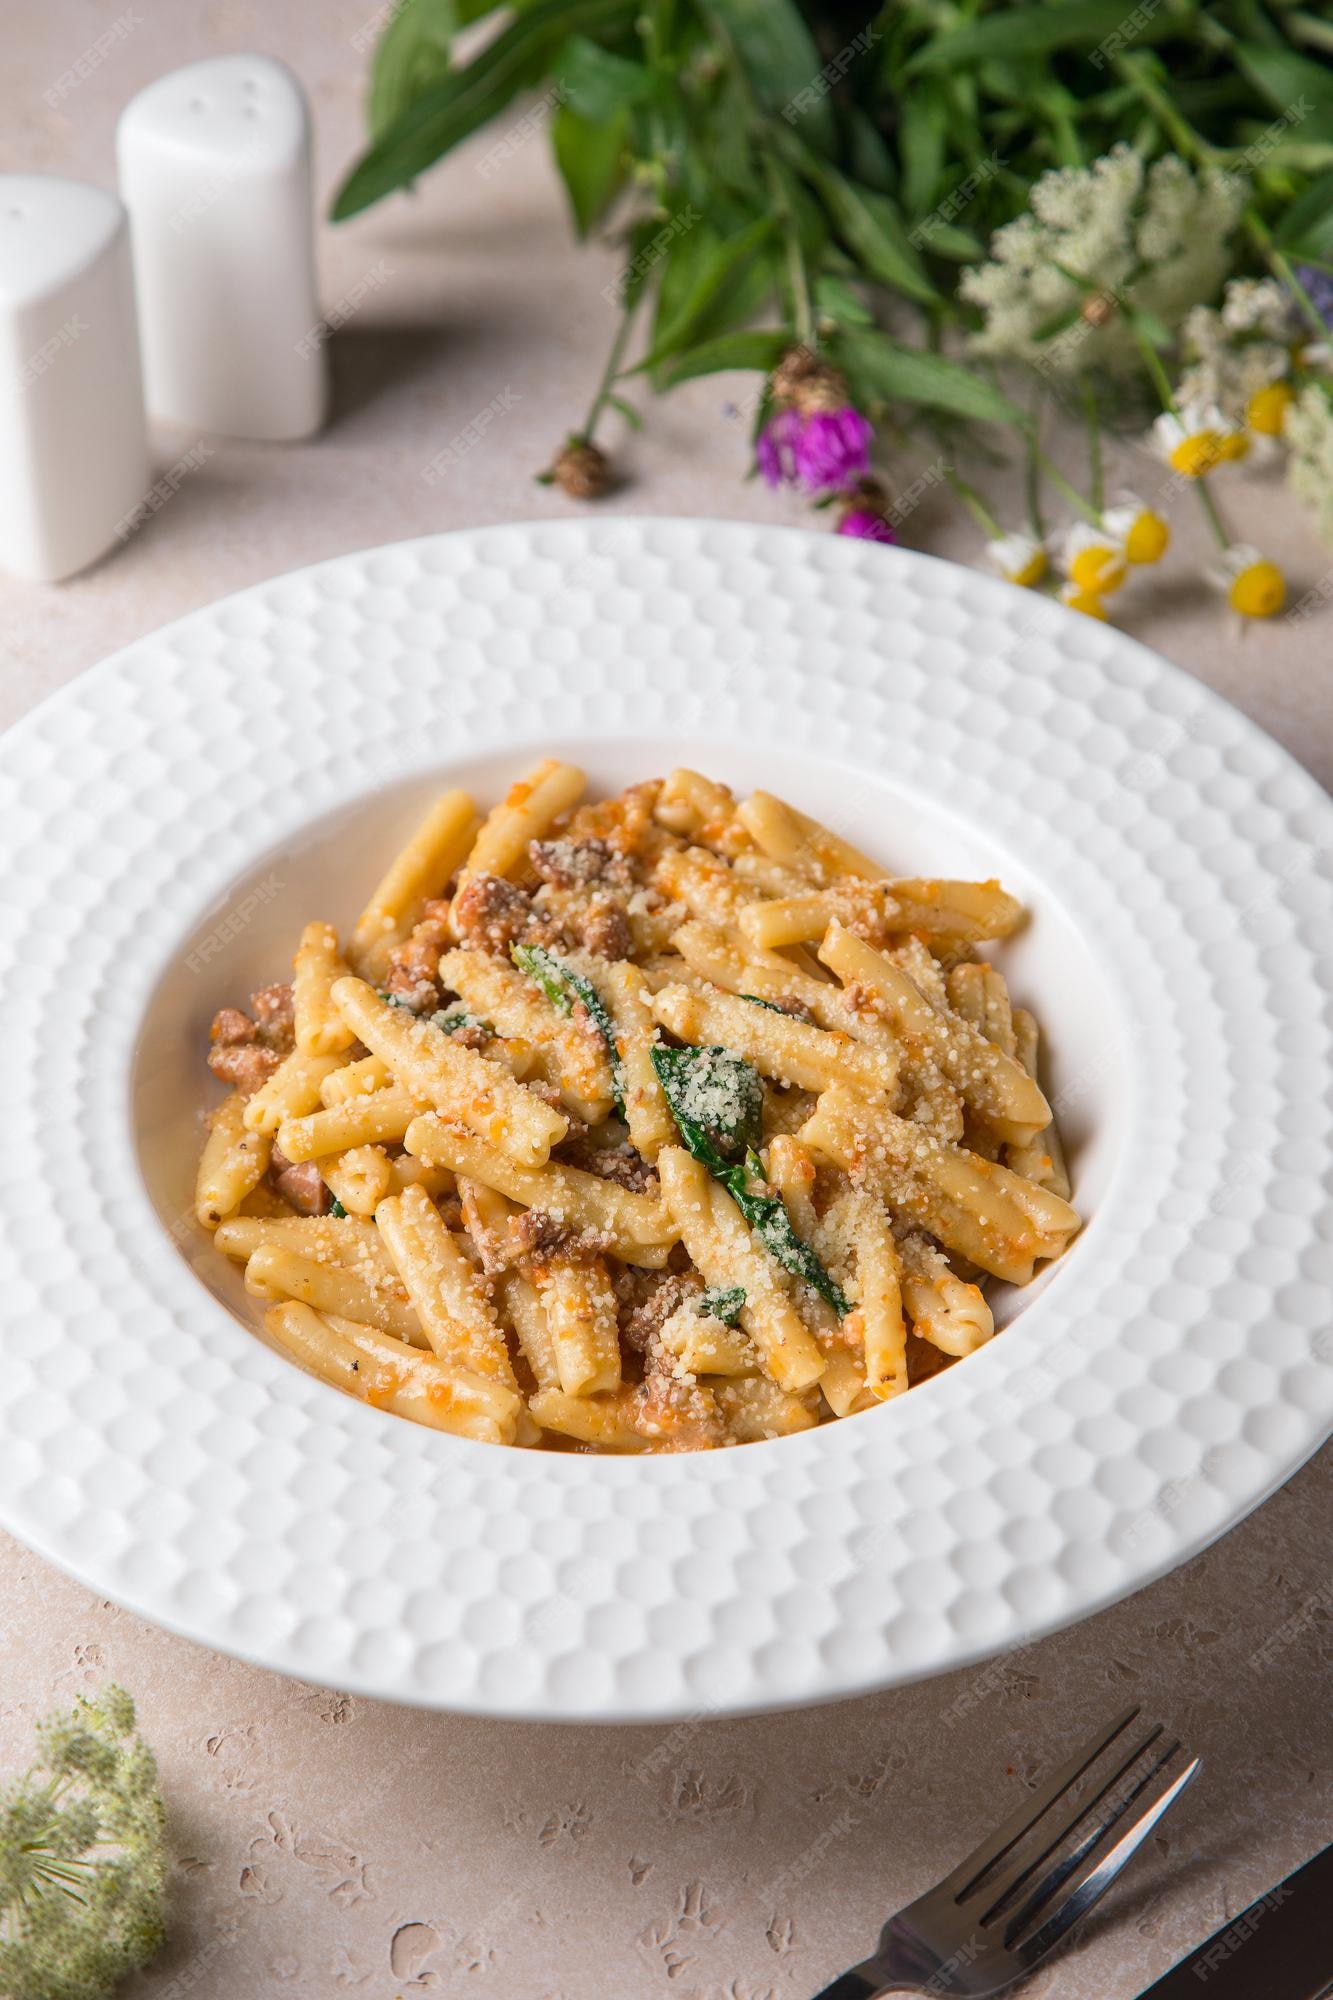 https://img.freepik.com/premium-photo/penne-rigate-pasta-with-pasta-with-ham-pepper-bolognese-pens-penne-food-white-plate_724662-2577.jpg?w=2000